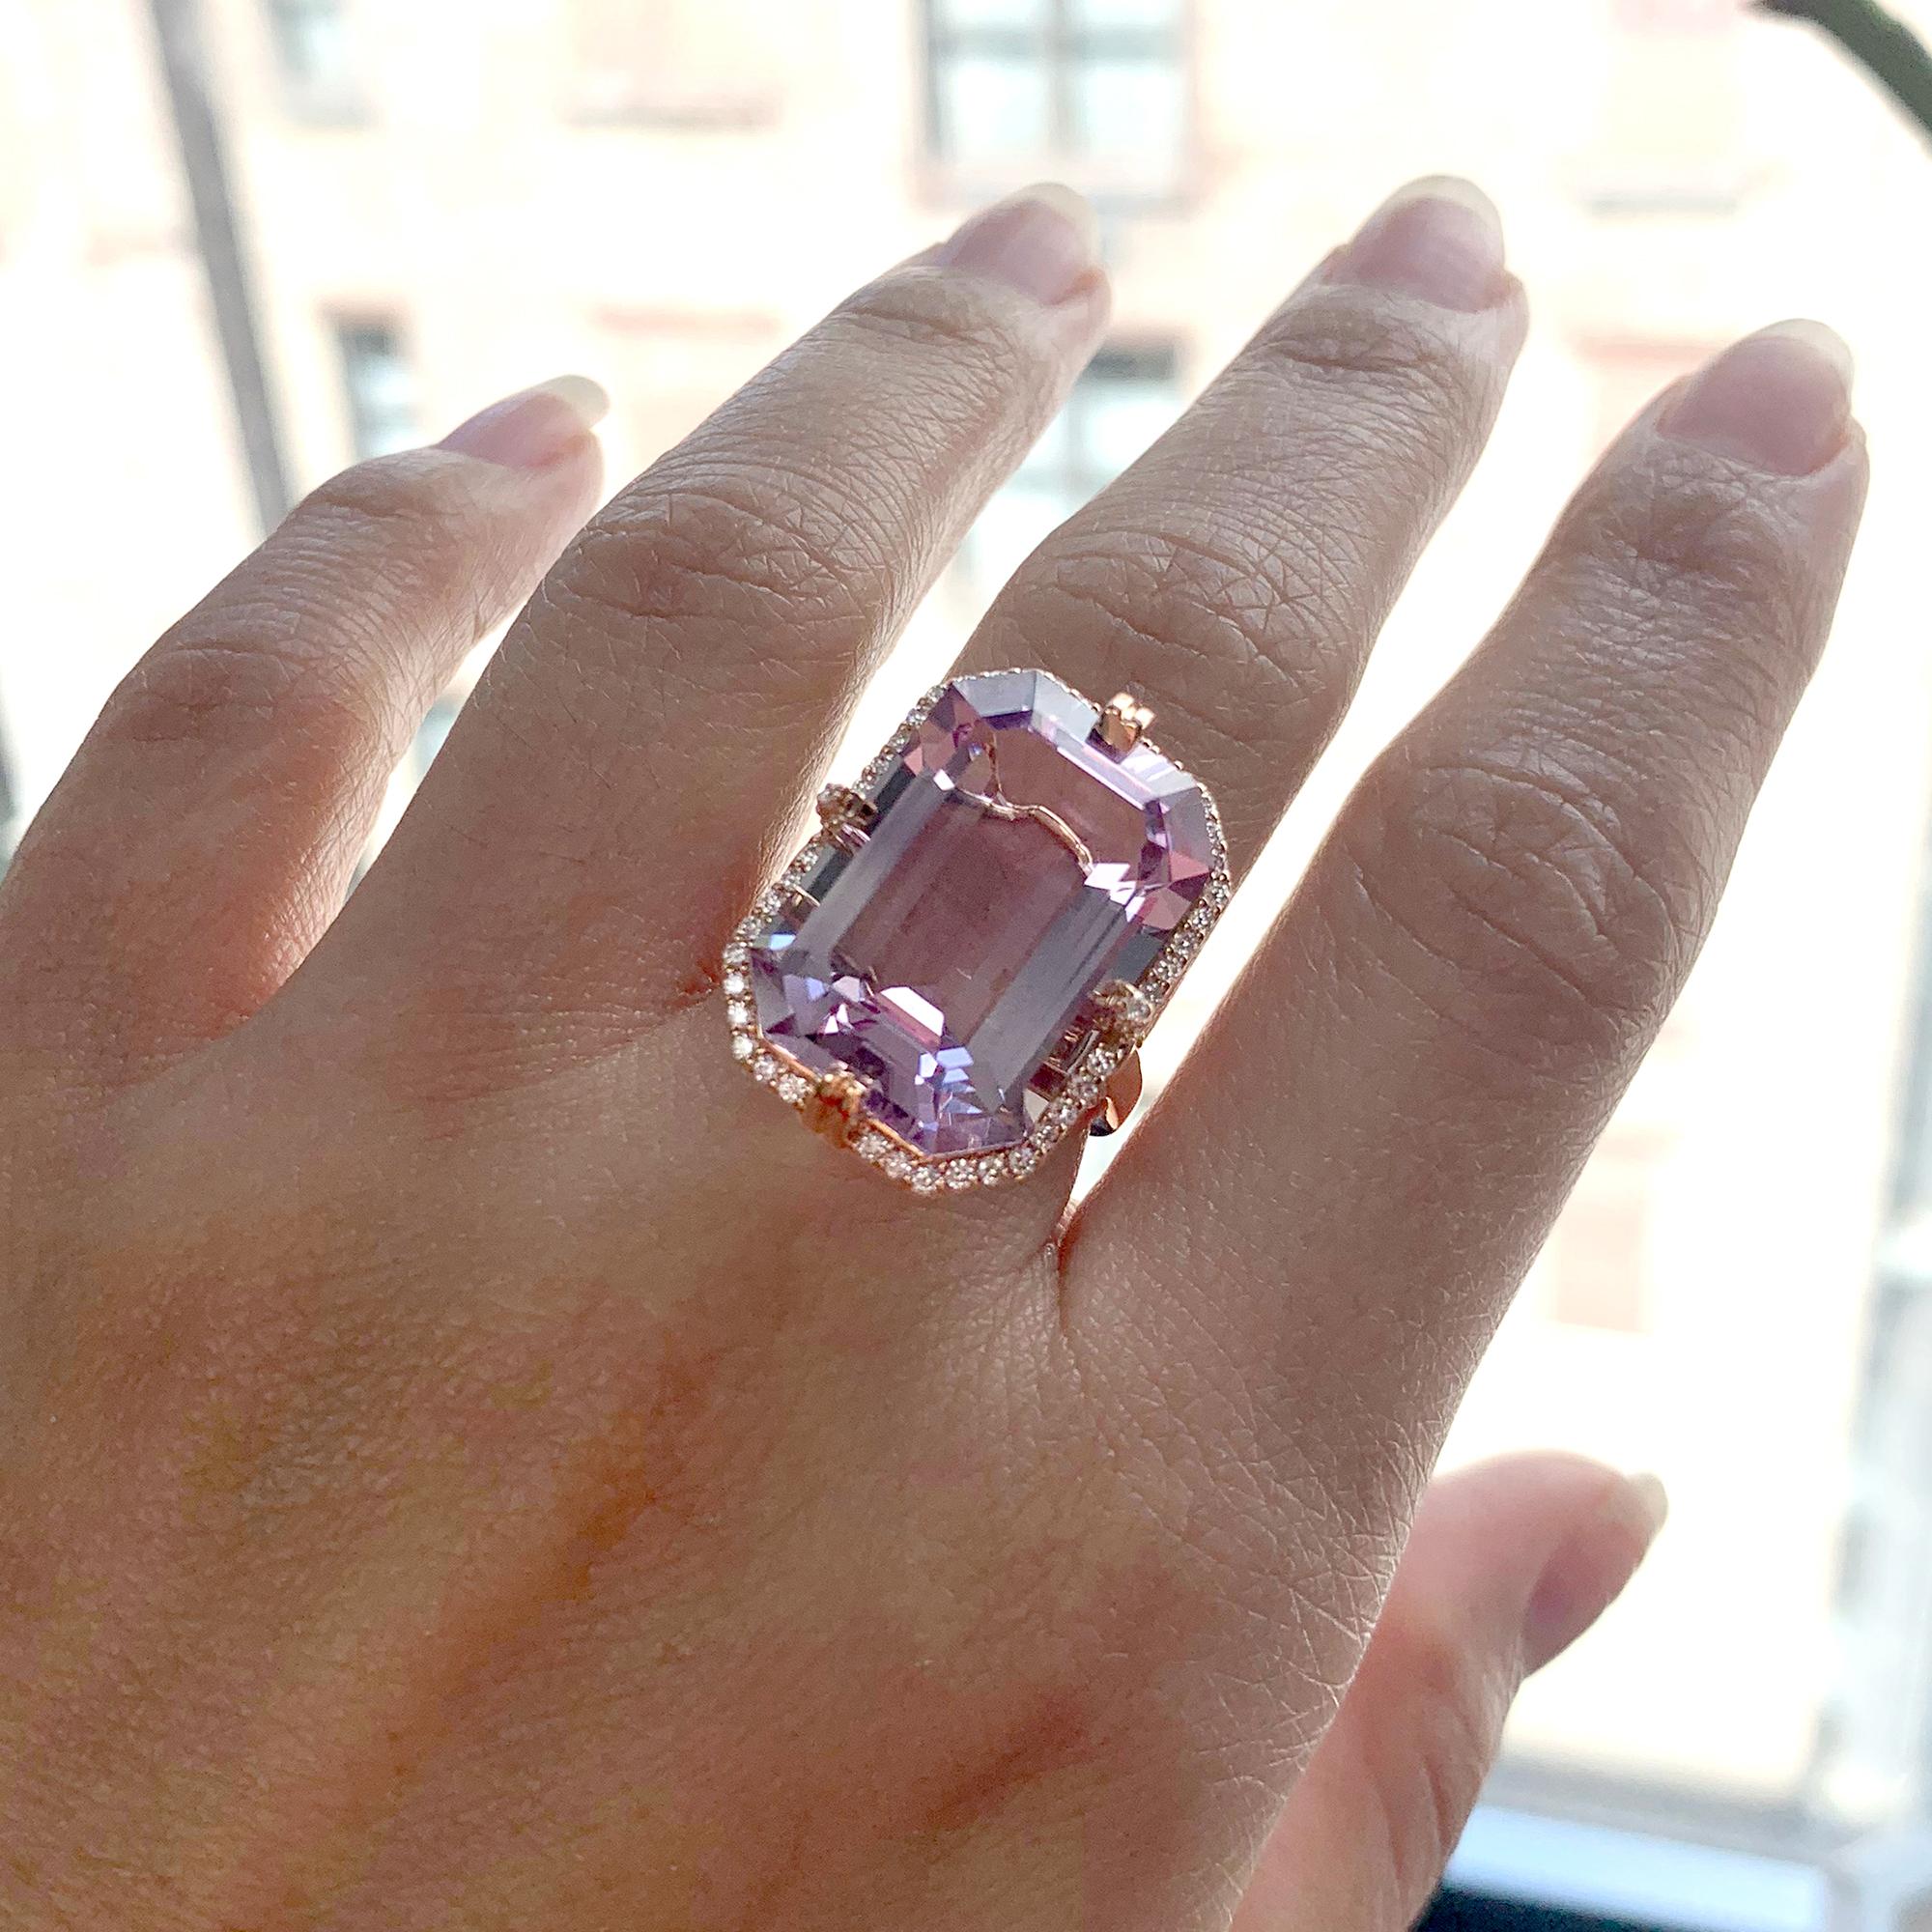 Lavender Amethyst Emerald Cut Ring in 18K Rose Gold with Diamonds, from 'Gossip' Collection. Like any good piece of gossip, this collection carries a hint of shock value. They will have everyone in suspense about what Goshwara will do next.

*